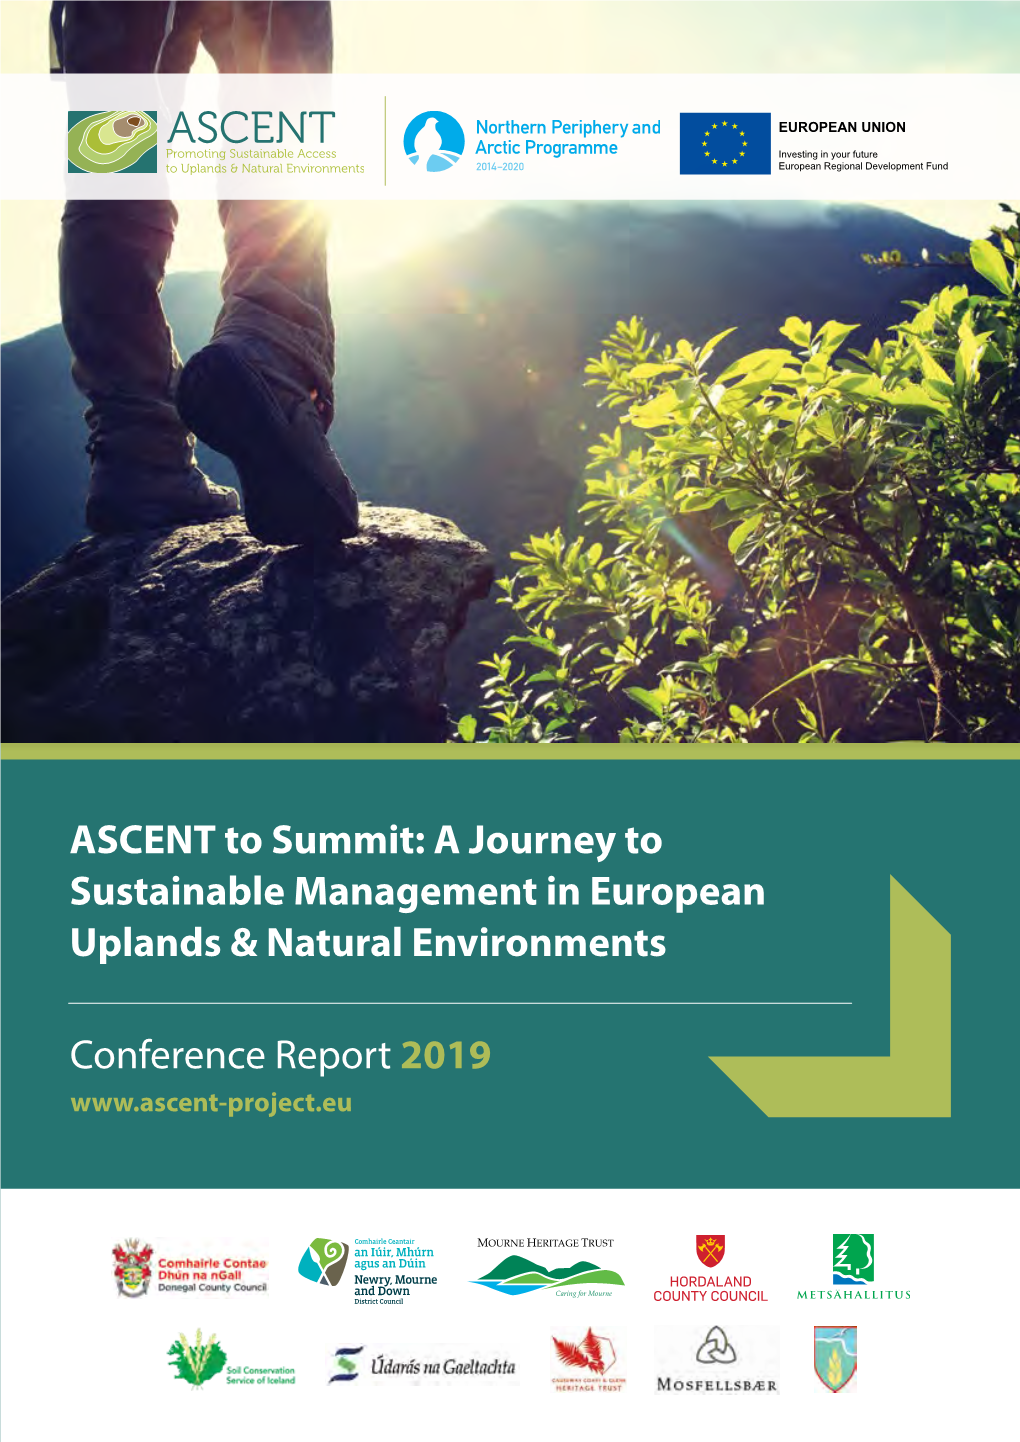 ASCENT to Summit: a Journey to Sustainable Management in European Uplands & Natural Environments